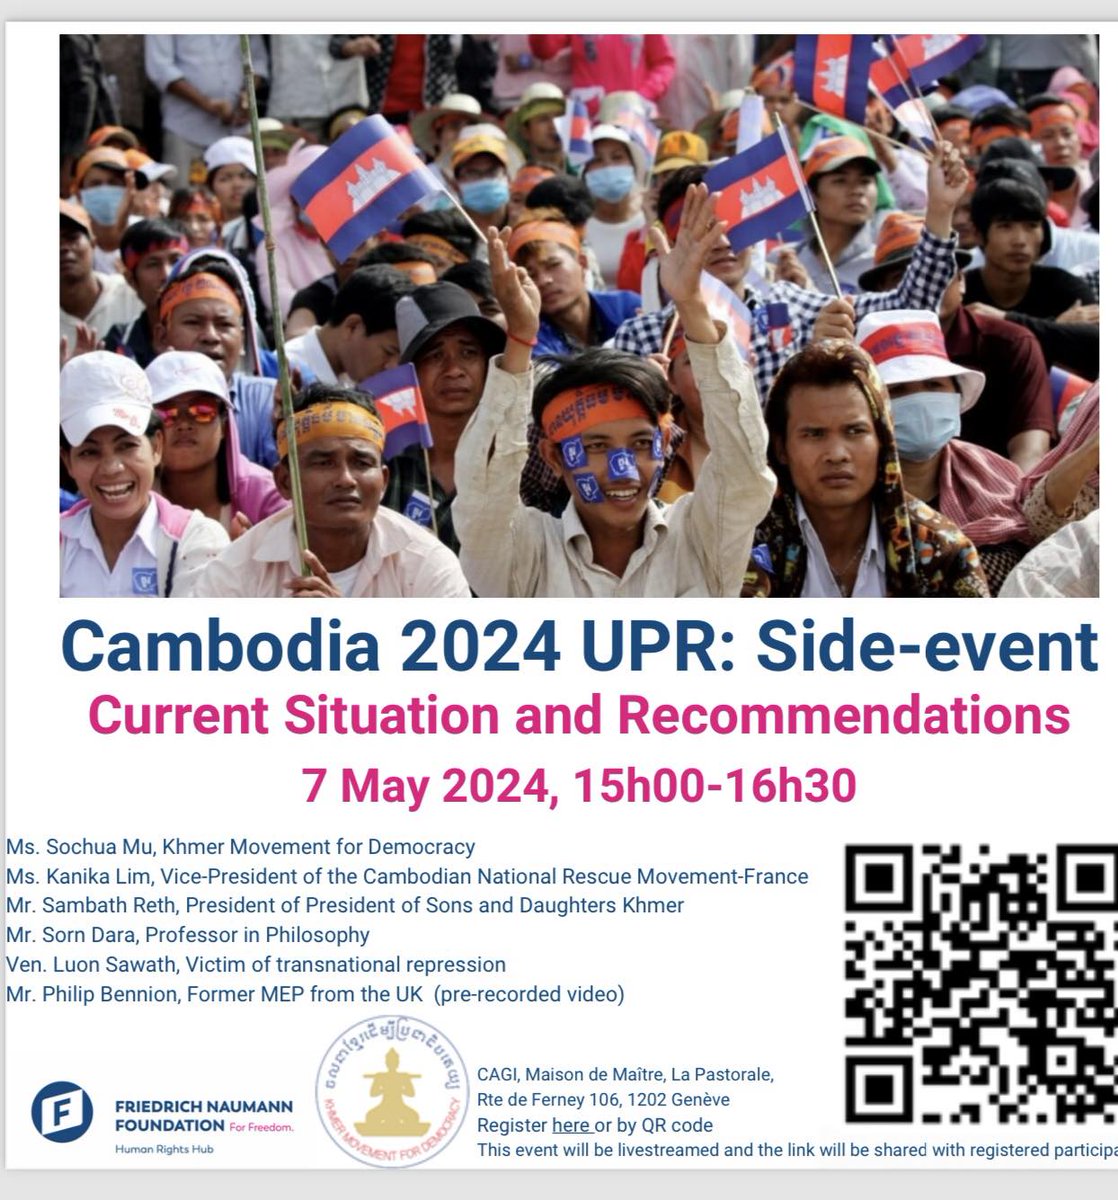 Cambodia 2024 UPR: Side Event Current Situation And Recommendations 7 May 2024 @ 15h00-16h30